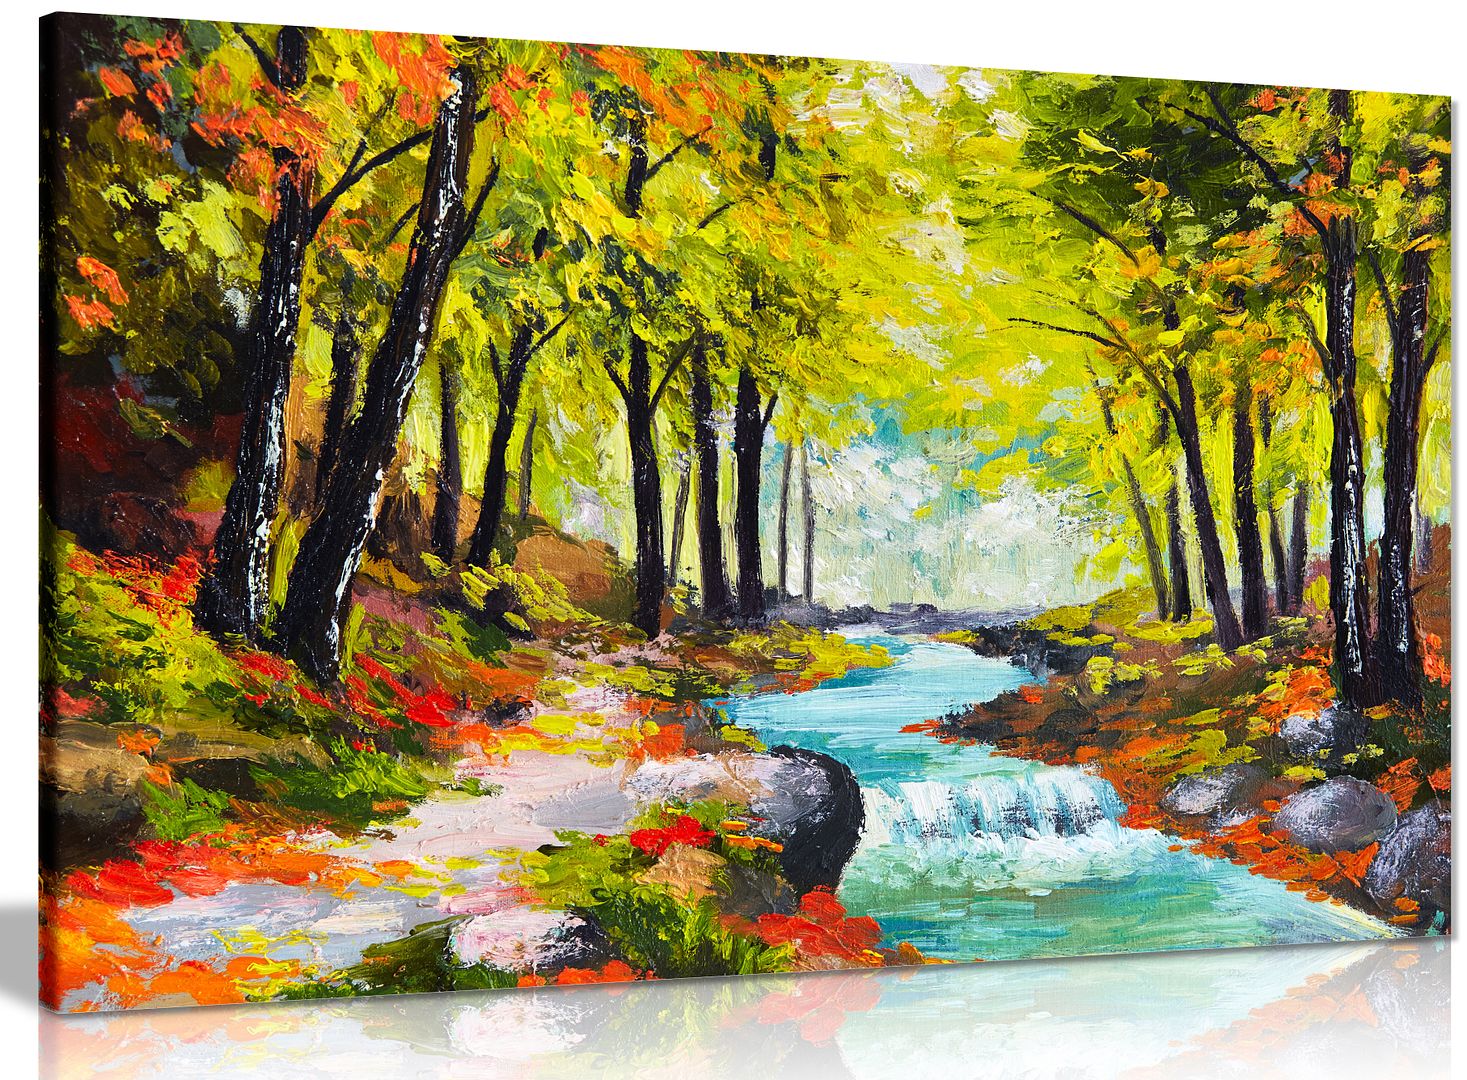 Landscape Oil Painting River In Autumn Forest Reproduction Canvas